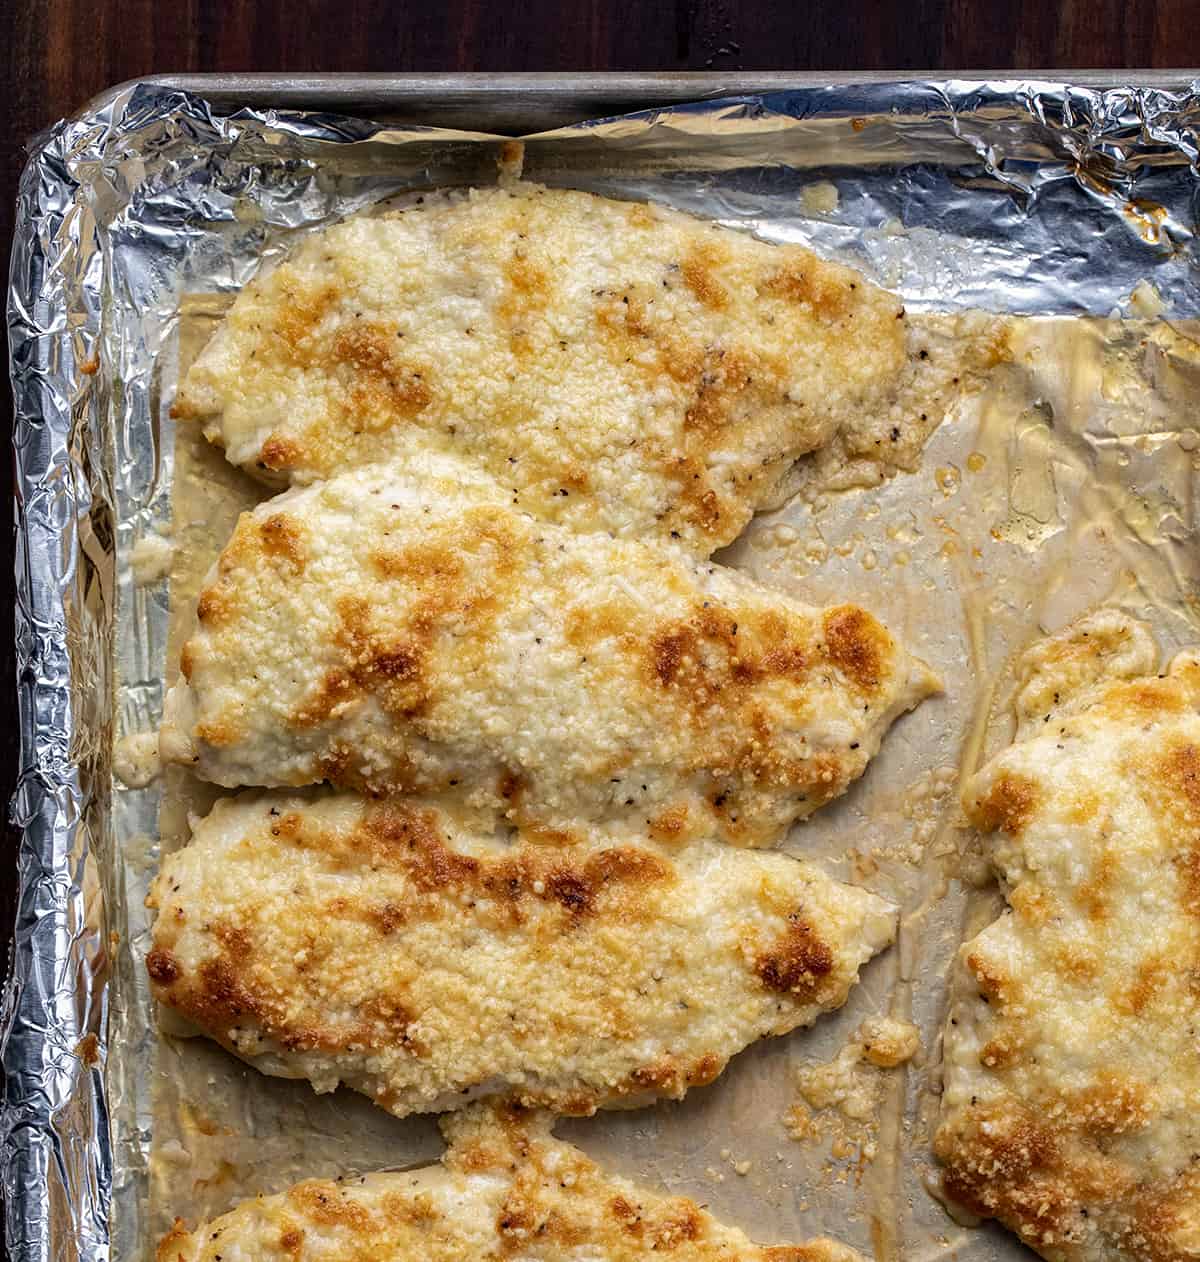 Baked Mayo Chicken on a Sheet Pan Lined with Aluminum Foil.